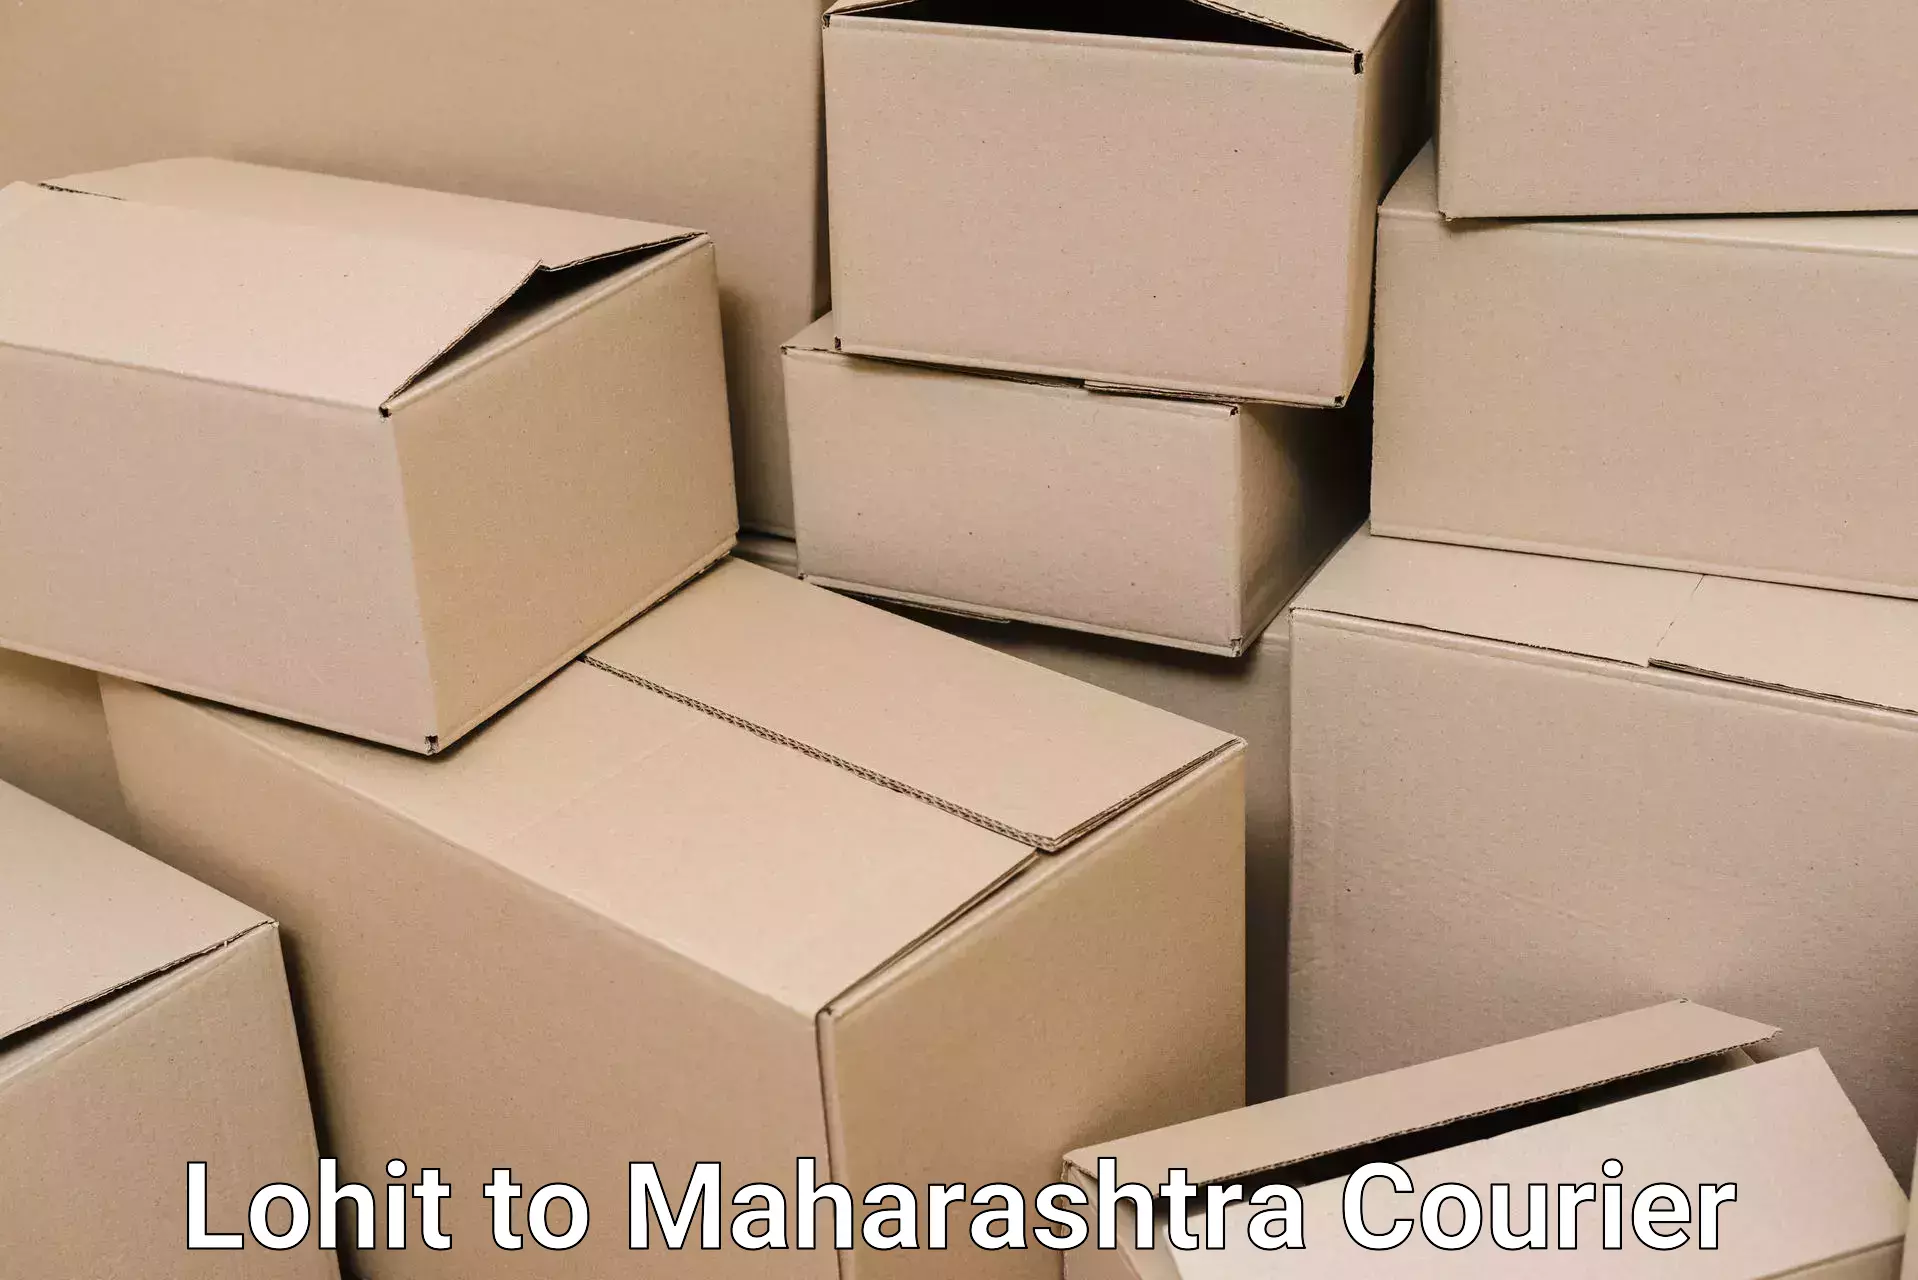 Residential moving experts Lohit to Parli